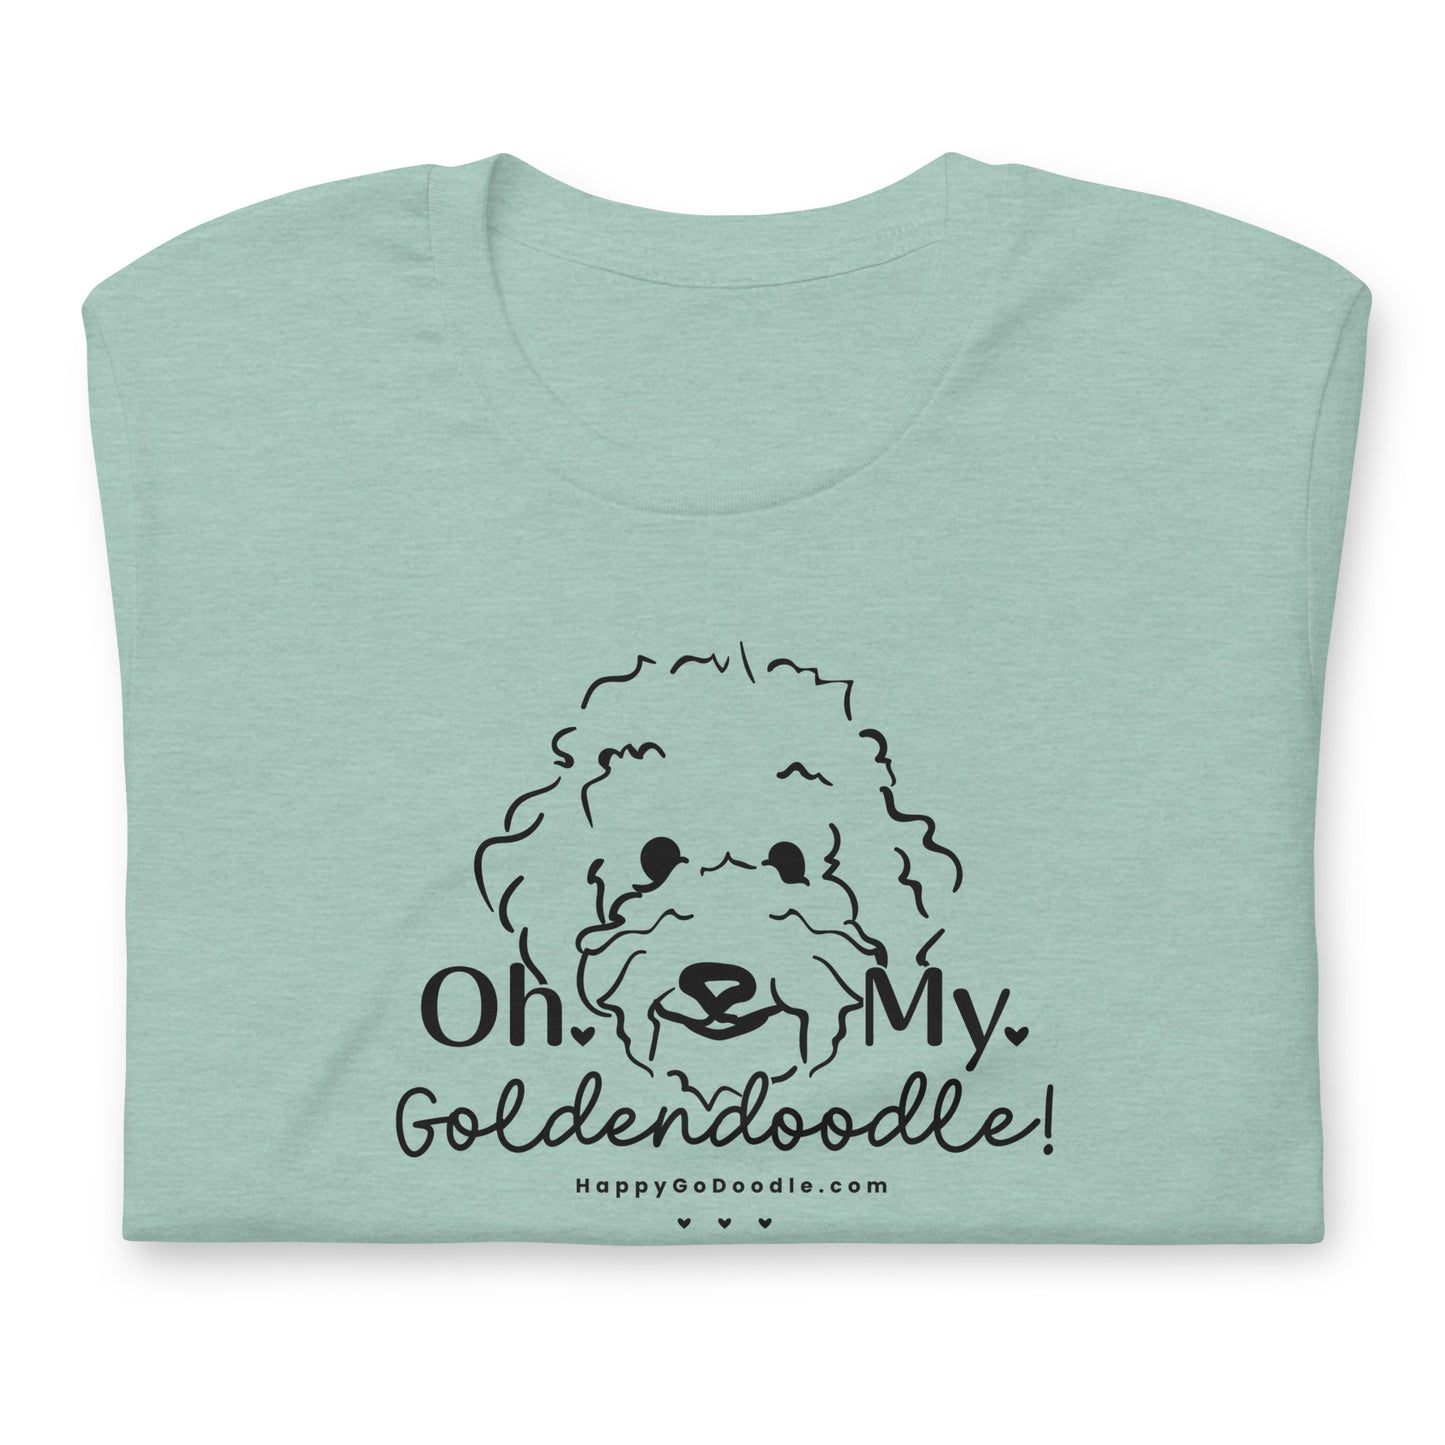 Goldendoodle t-shirt with Goldendoodle face and words "Oh My Goldendoodle" in heather prism dusty blue color